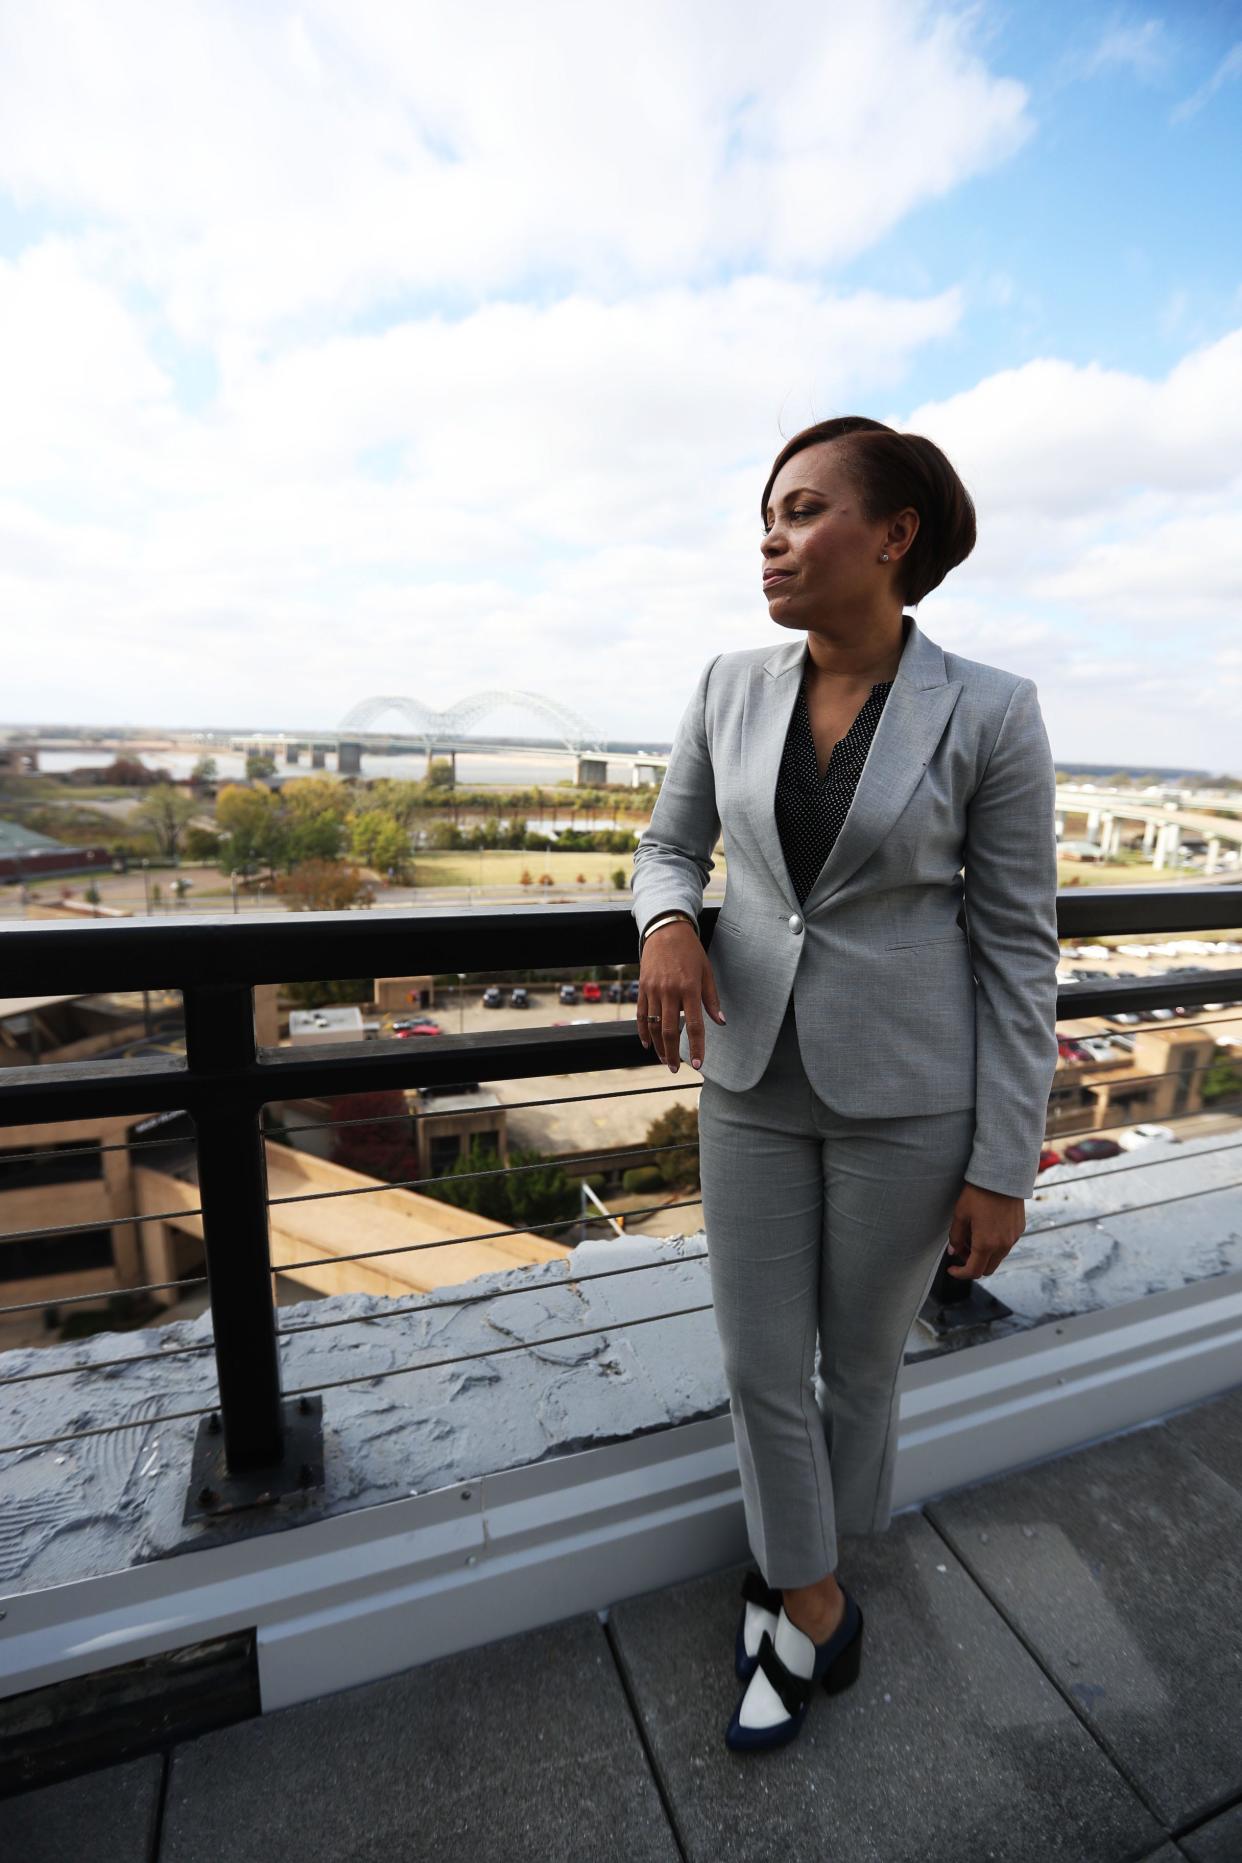 Chandell Ryan, the new CEO of the Downtown Memphis Commission, is featured in Kudzukian's new series, "Her Journey." The series highlights the accomplishments of Black women in Memphis who are excelling in their careers and are great role models.